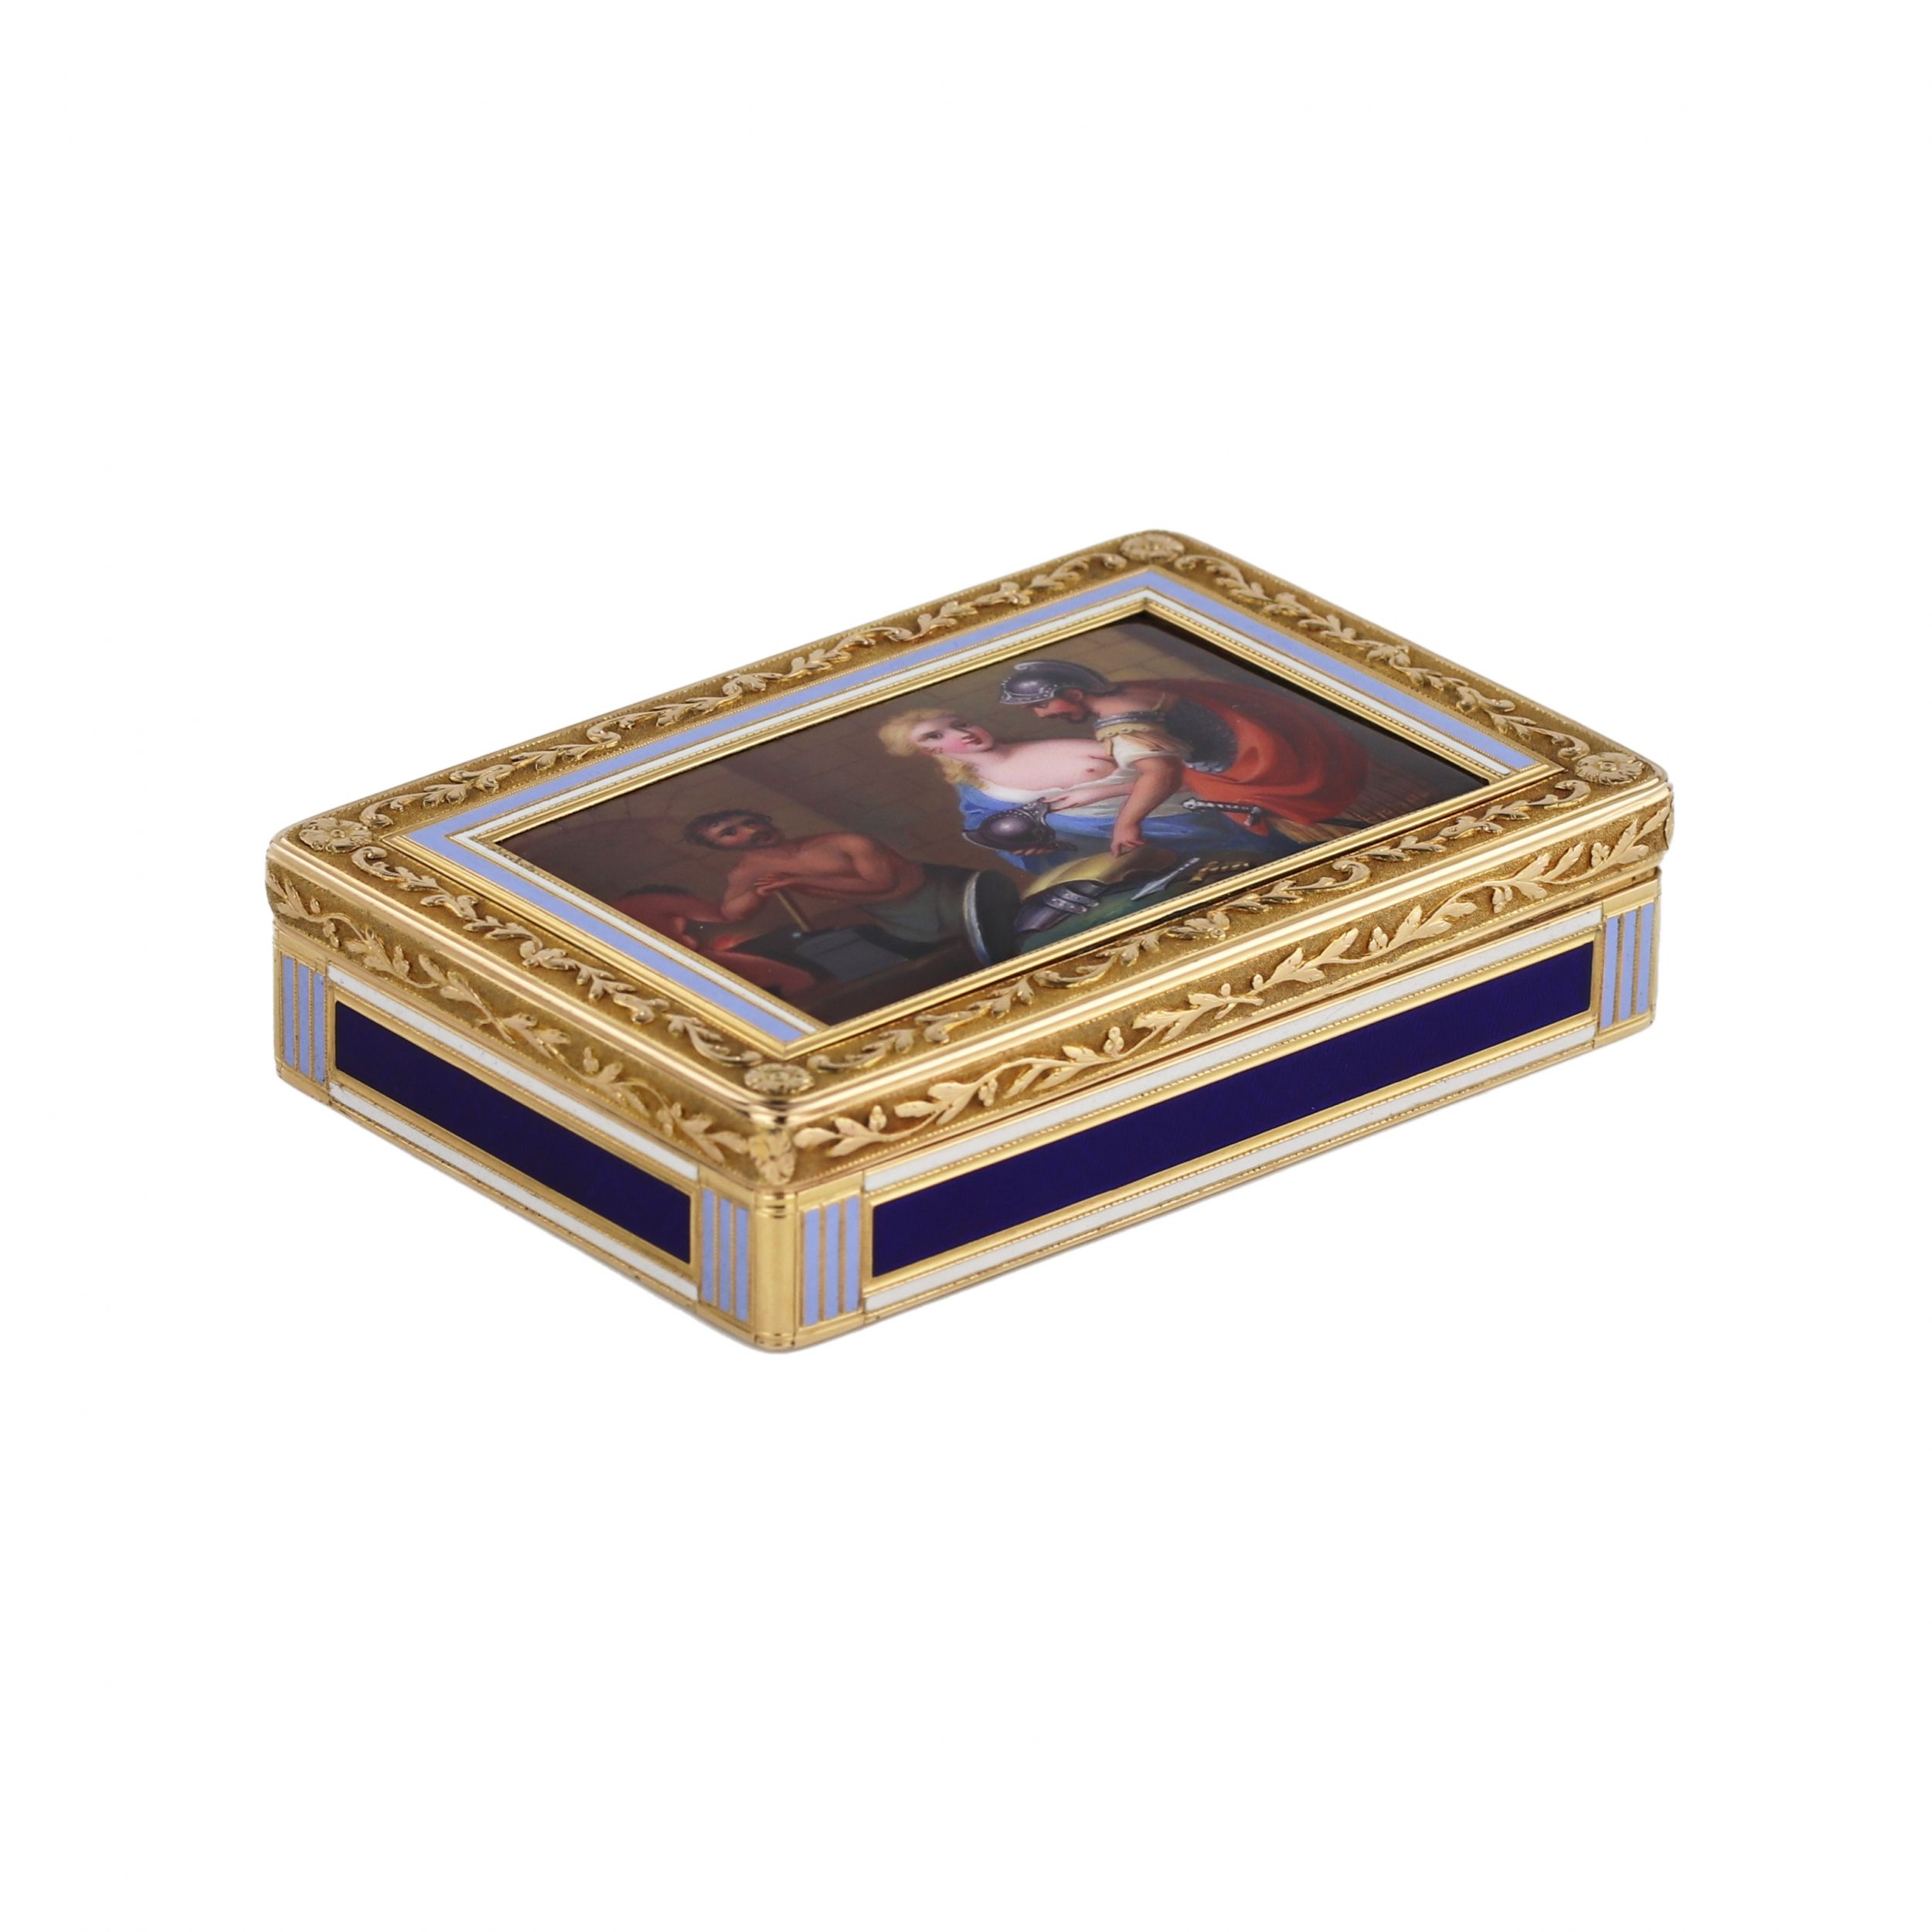 Snuffbox-in-gold-and-enamel-Augustin-André-Egen-Paris-1798-1809-